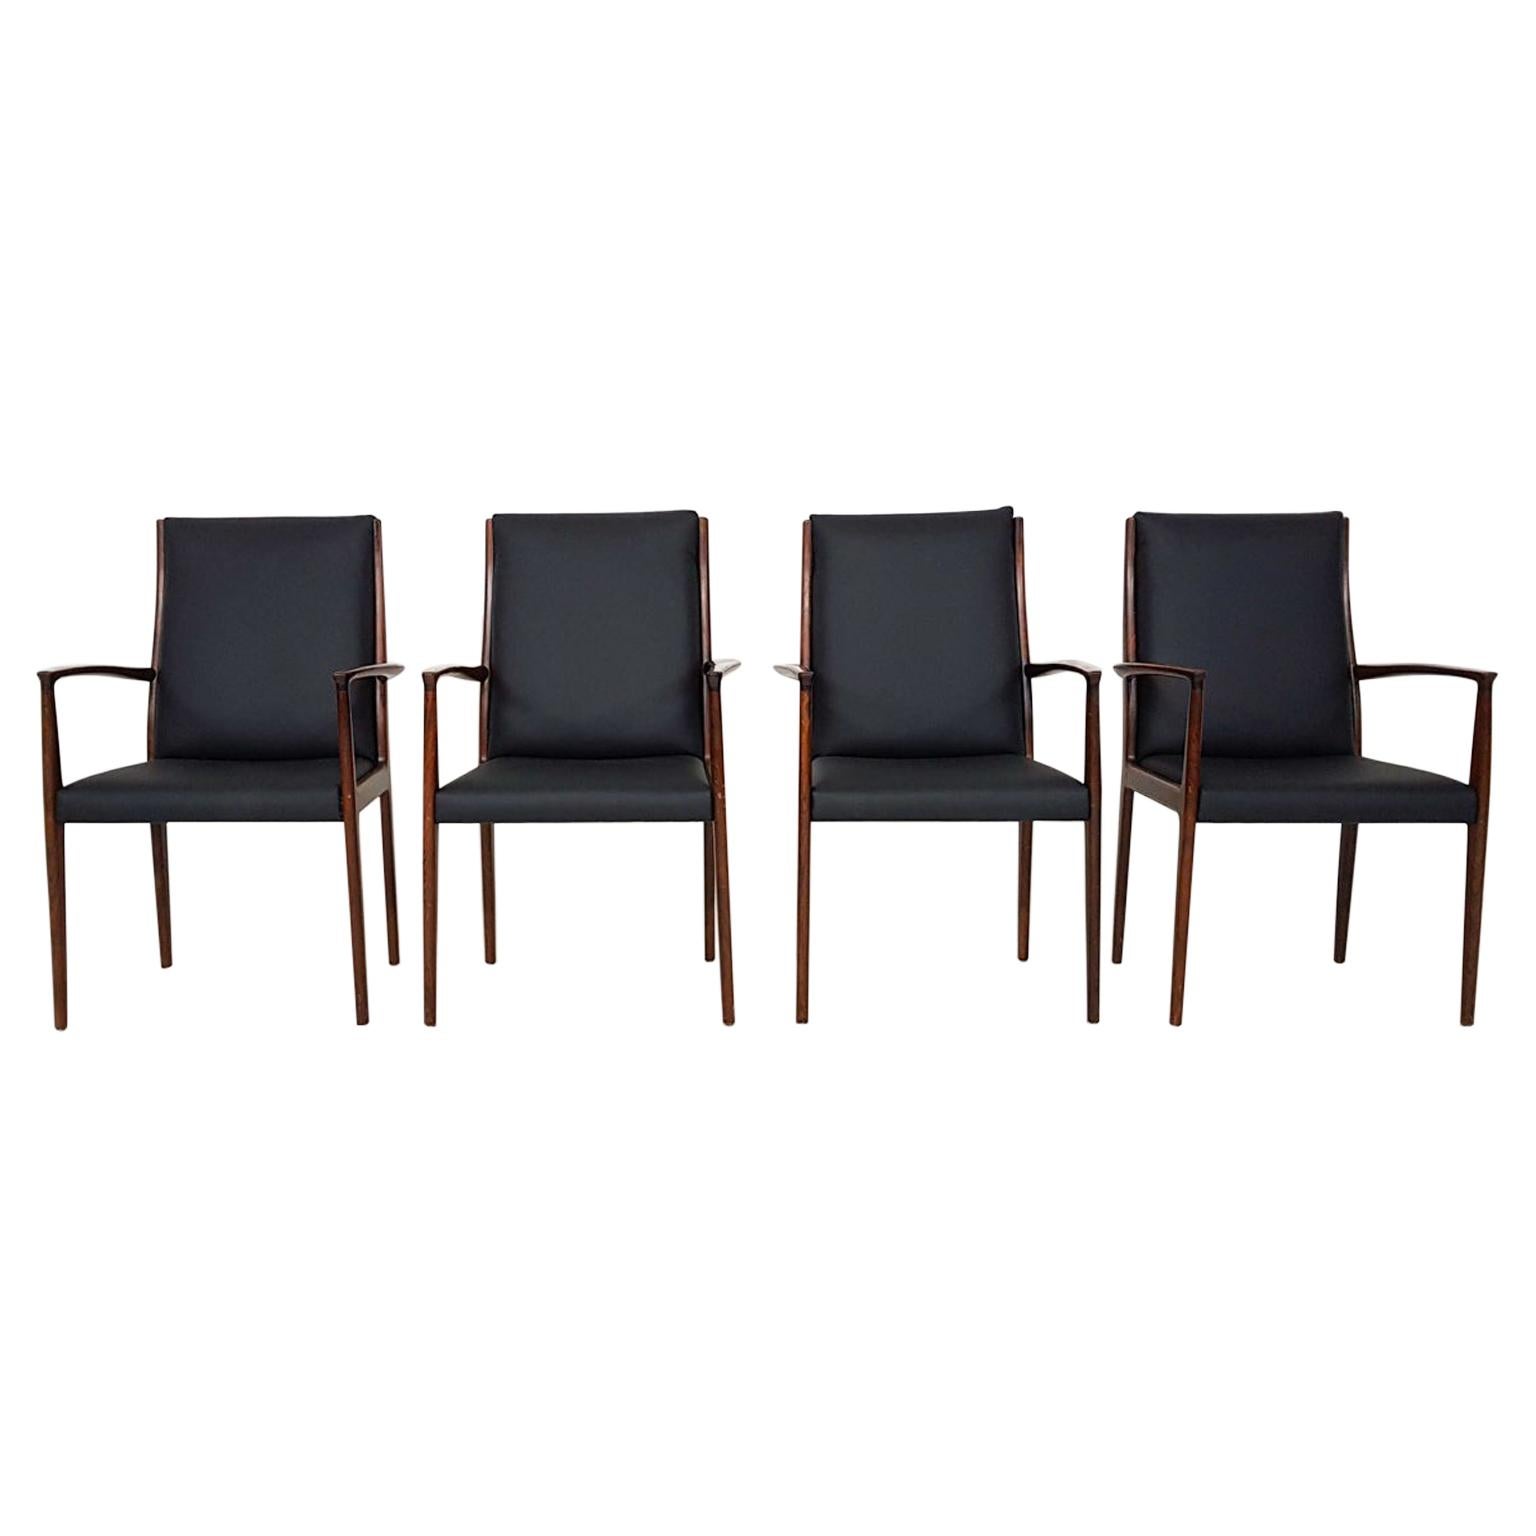 Set of 4 Rosewood and Black Leather Dining Chairs, Danish Modern, 1950s